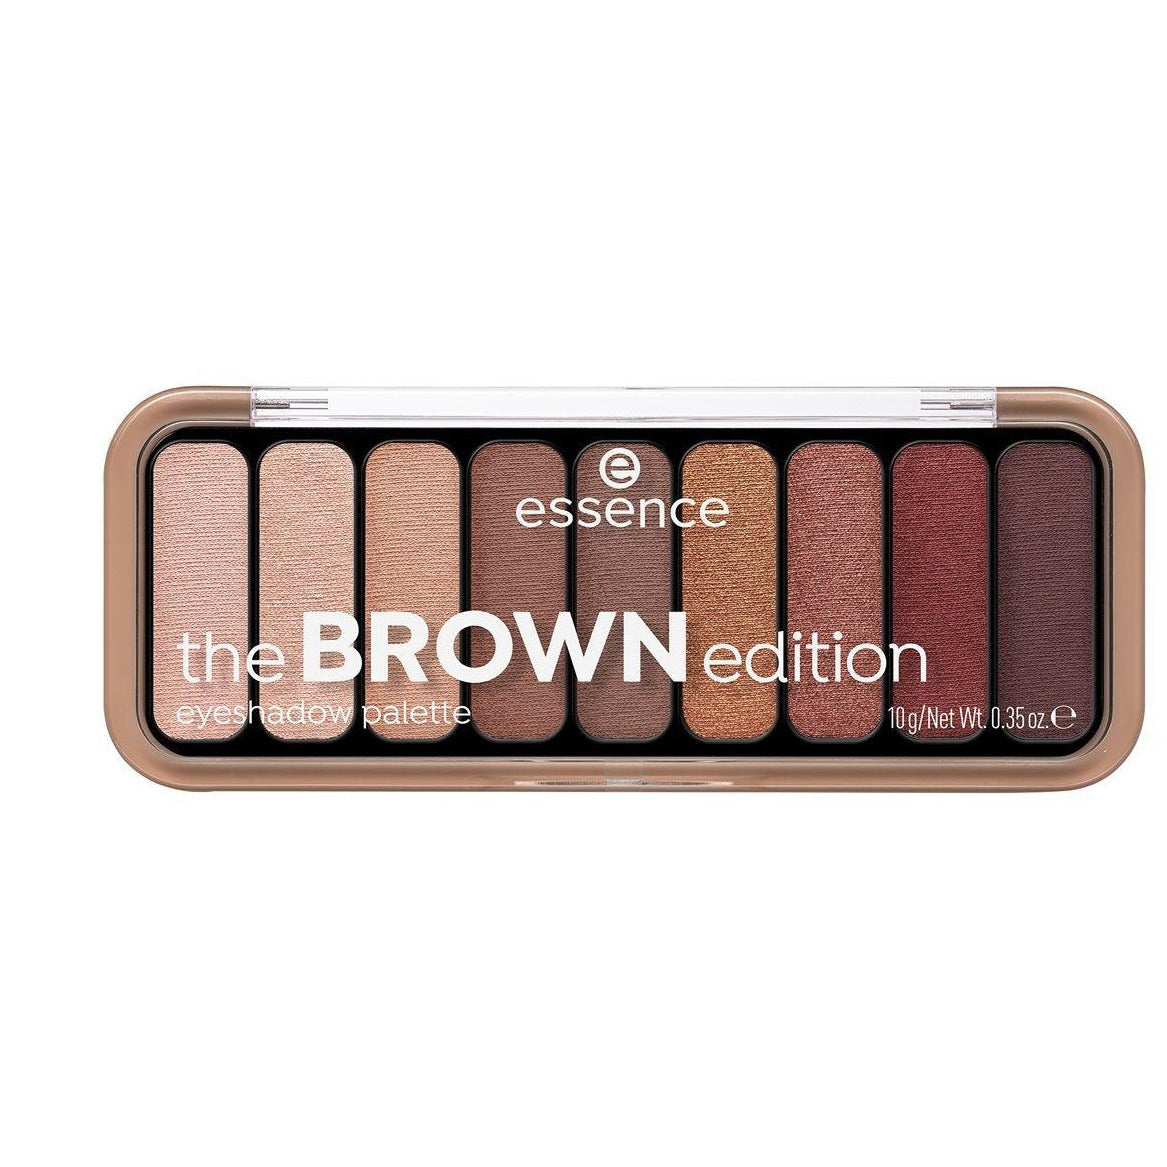 Essence the BROWN edition eyeshadow palette 30 Gorgeous Browns 10g - Beauty Bounty